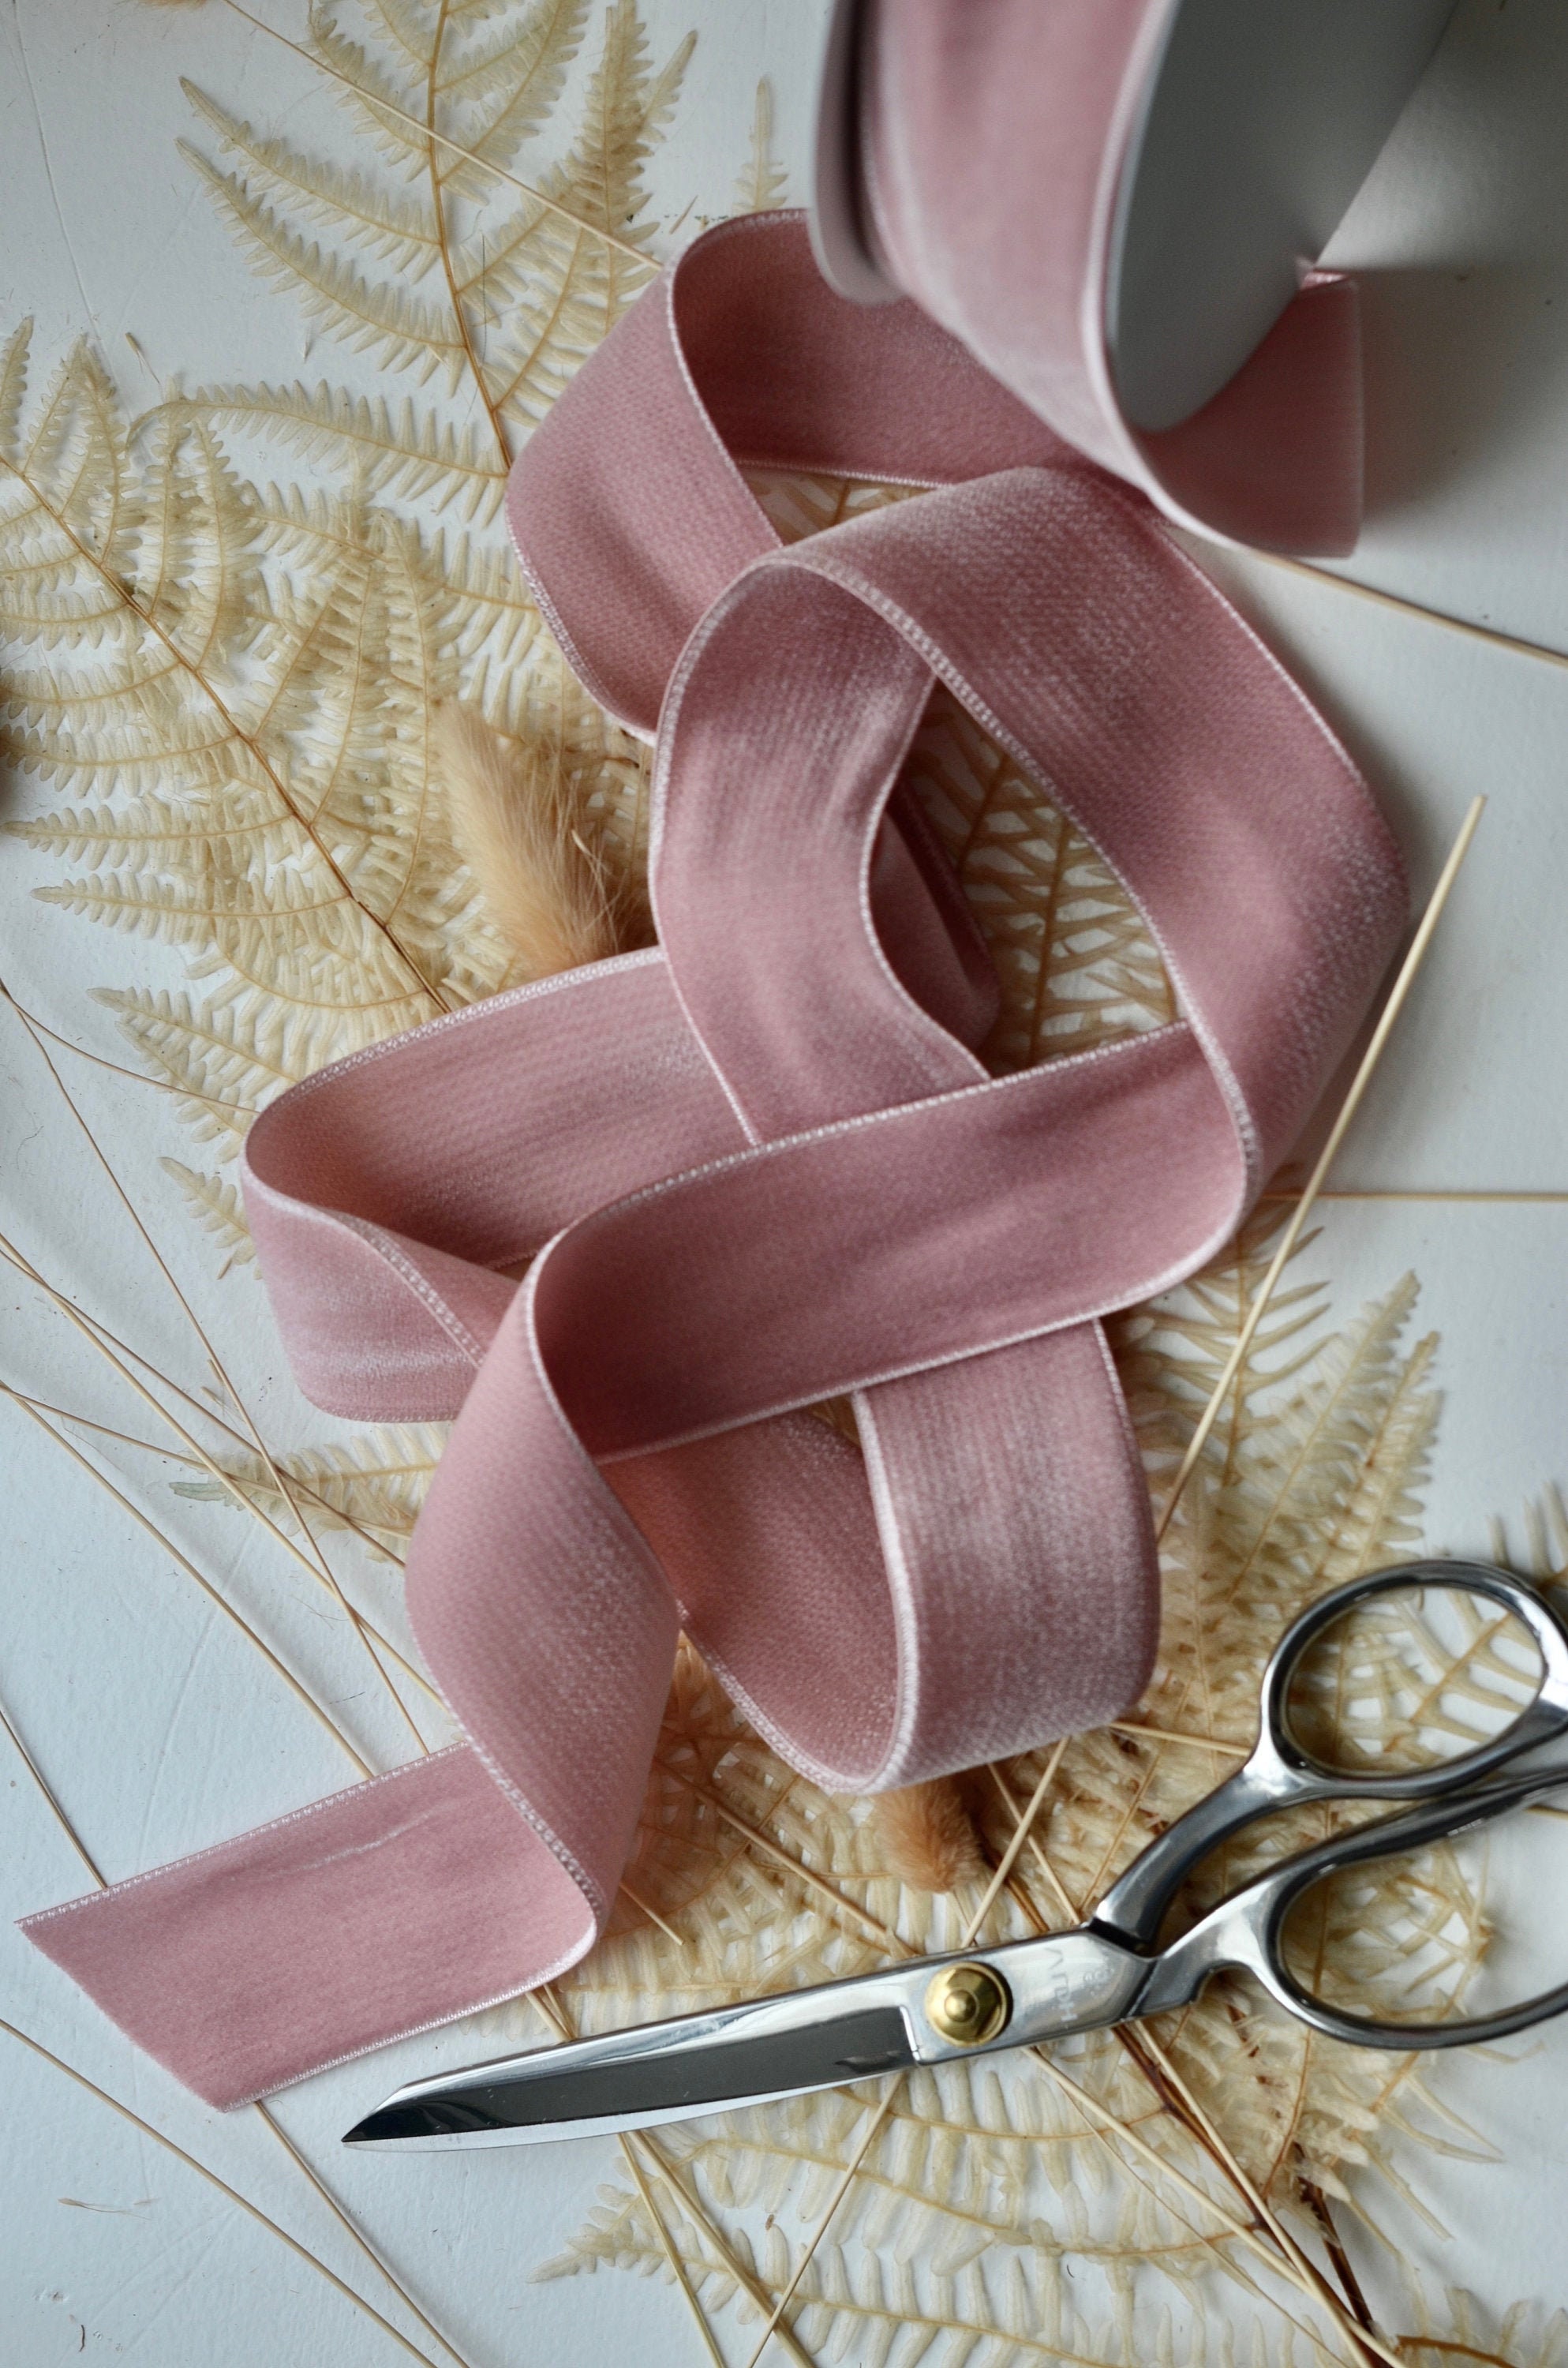 HUIHUANG Dusty Rose Ribbon 1.5 inch Double Face Satin Ribbon Silk Like  Ribbon 50 Yards Roll for Gift Wrapping Bows Making Floral Bouquet Wedding